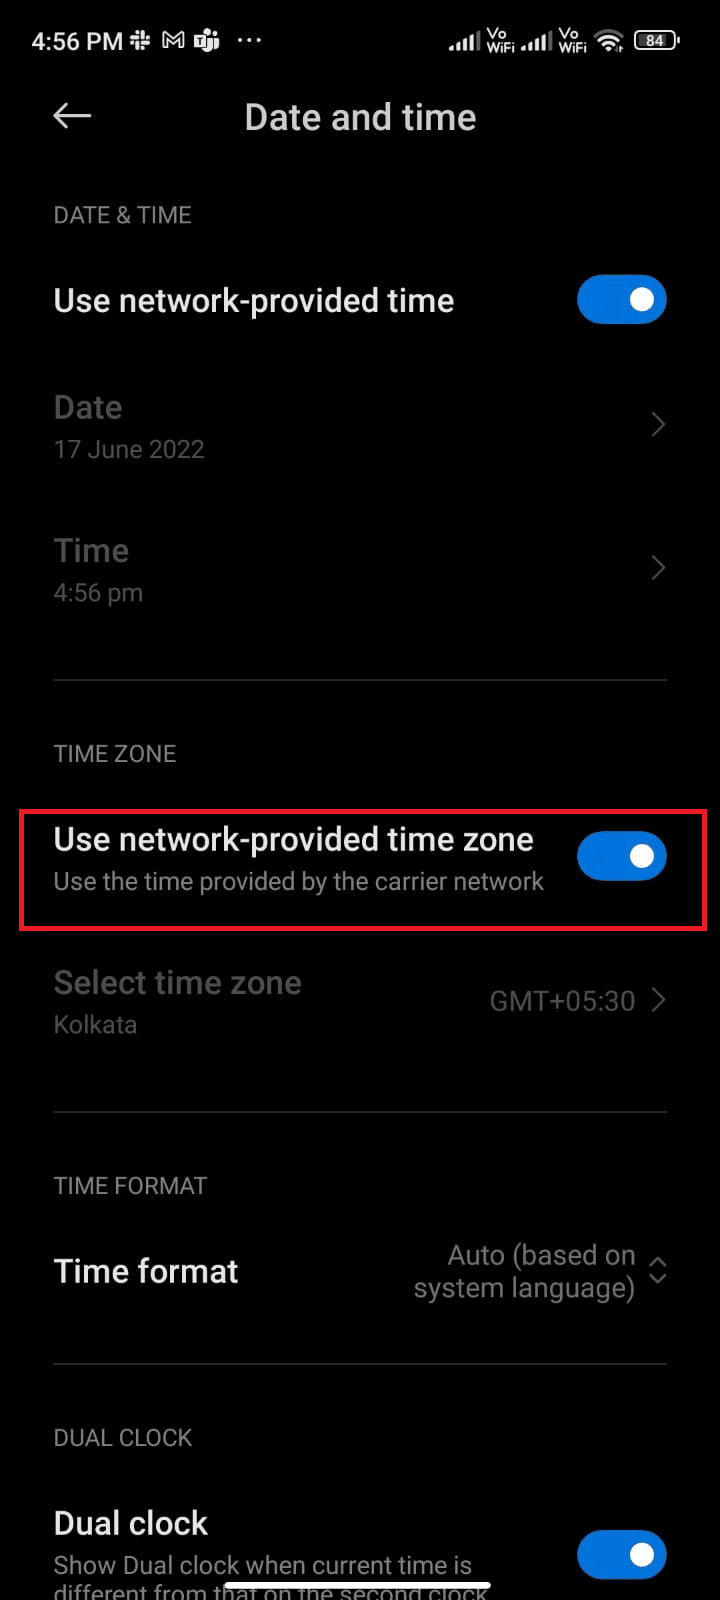 Toggle on Use network-provided time zone option